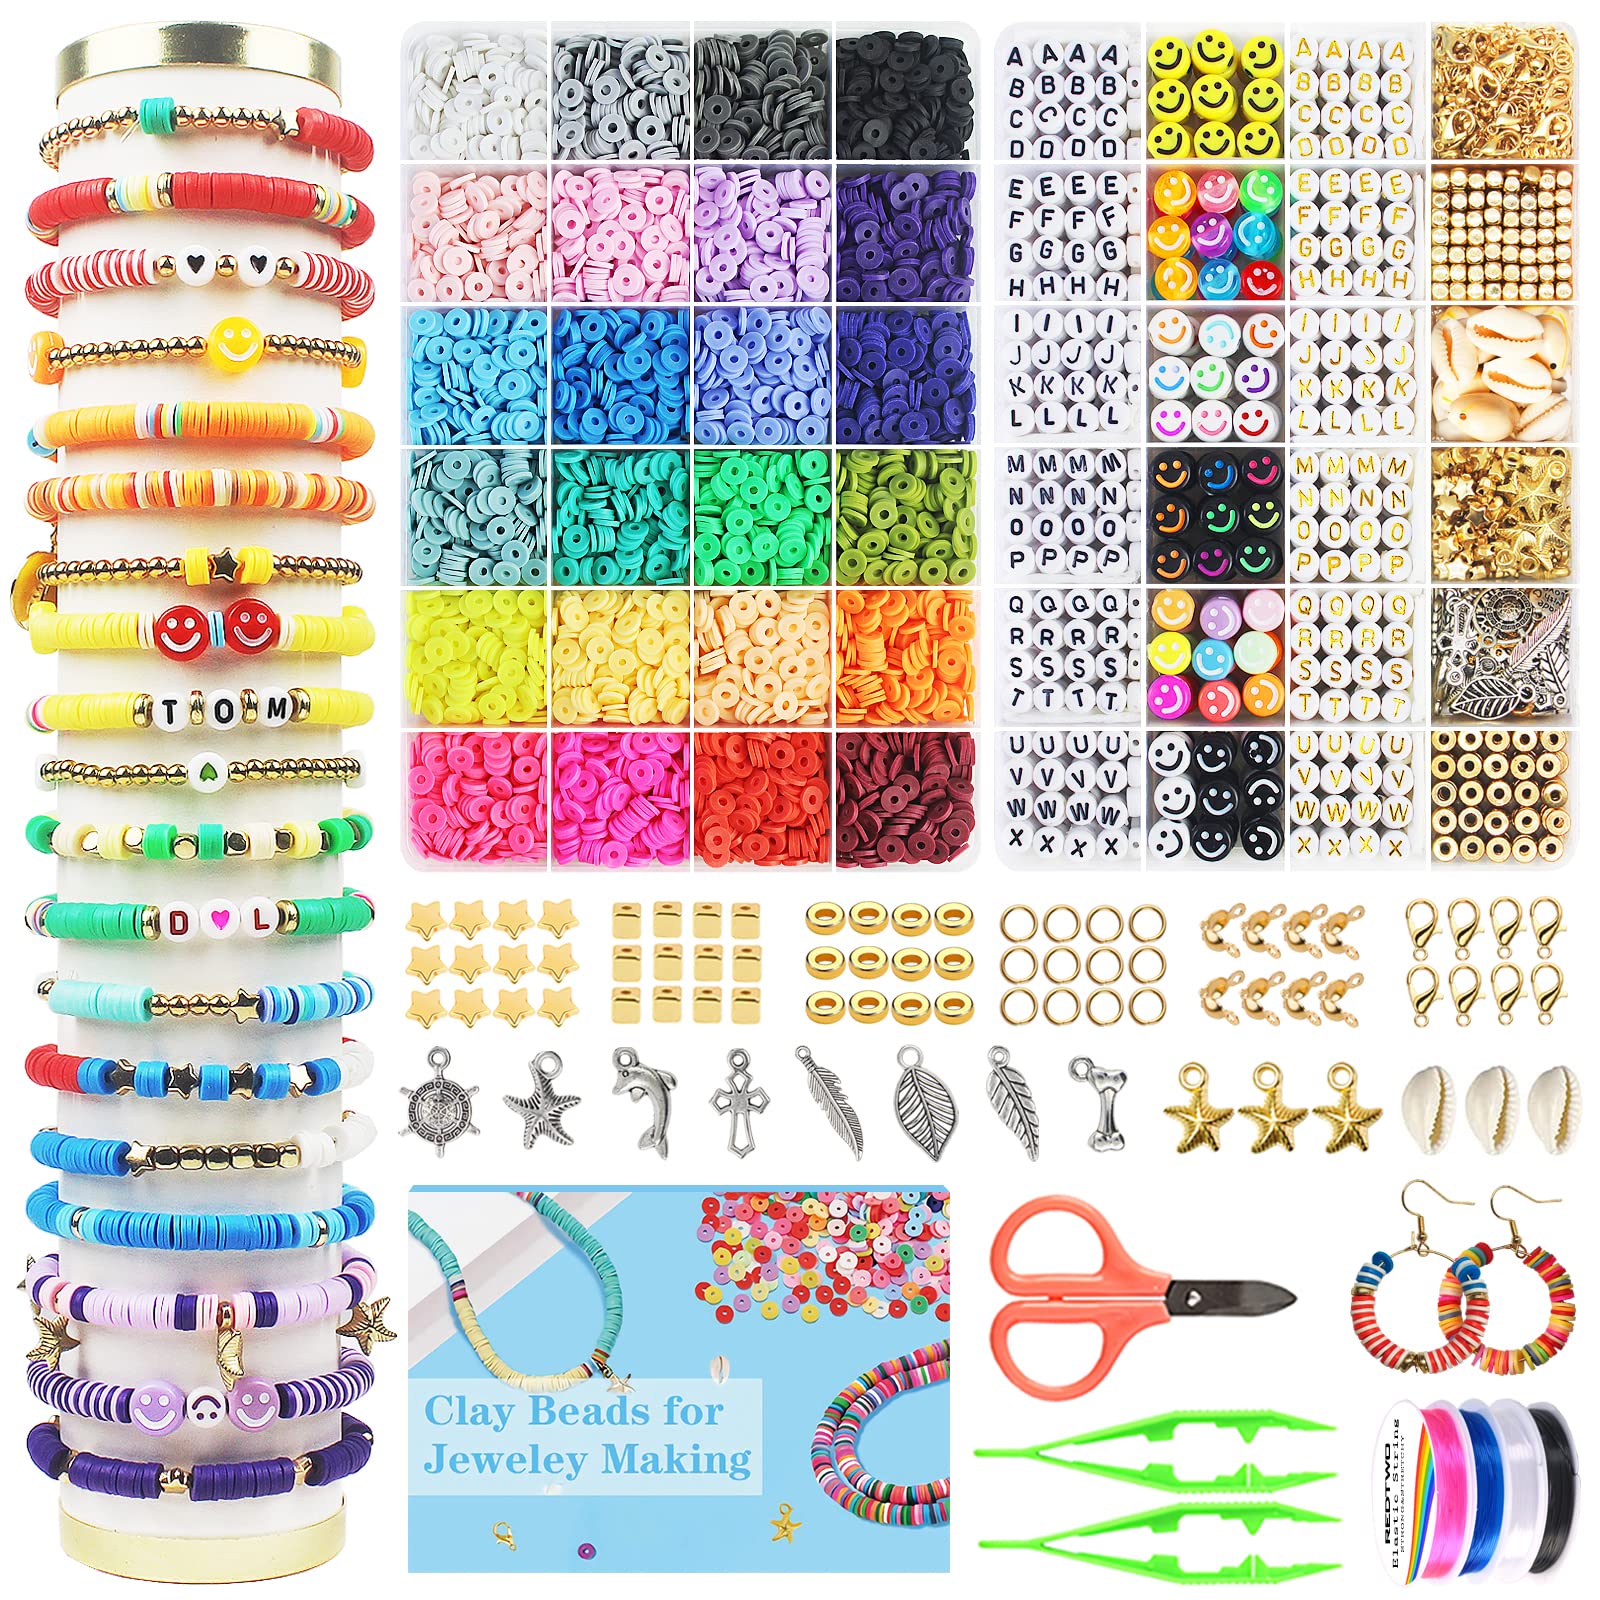 12 Stunning Clay Bead Bracelets to Add to Your Collection